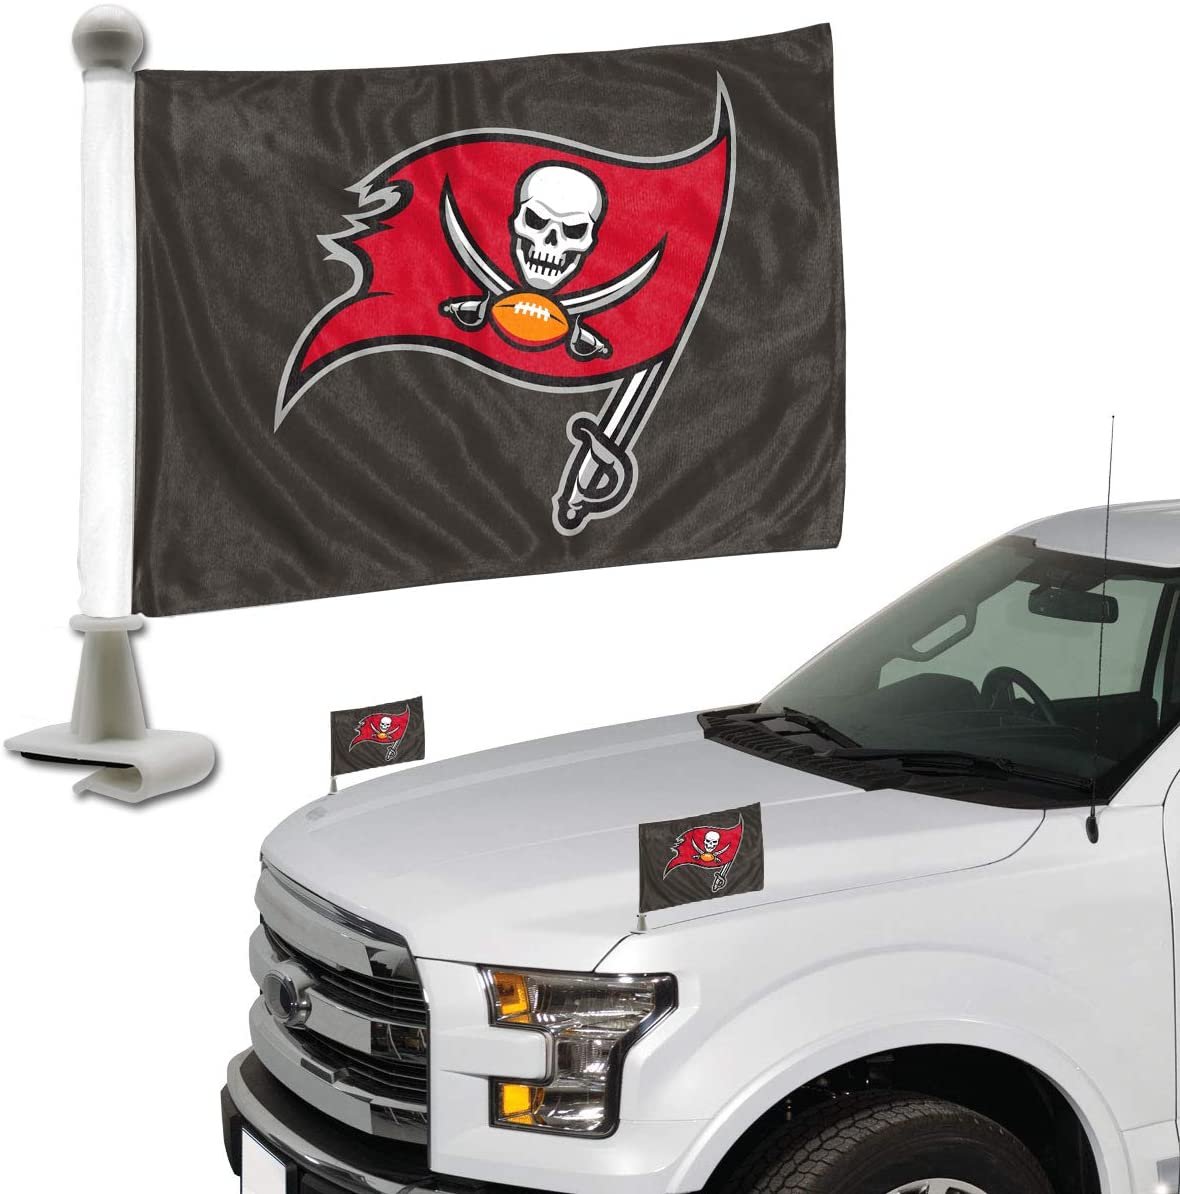 FANMATS ProMark NFL Tampa Bay Buccaneers Flag Set 2-Piece Ambassador Style, Team Color, One Size